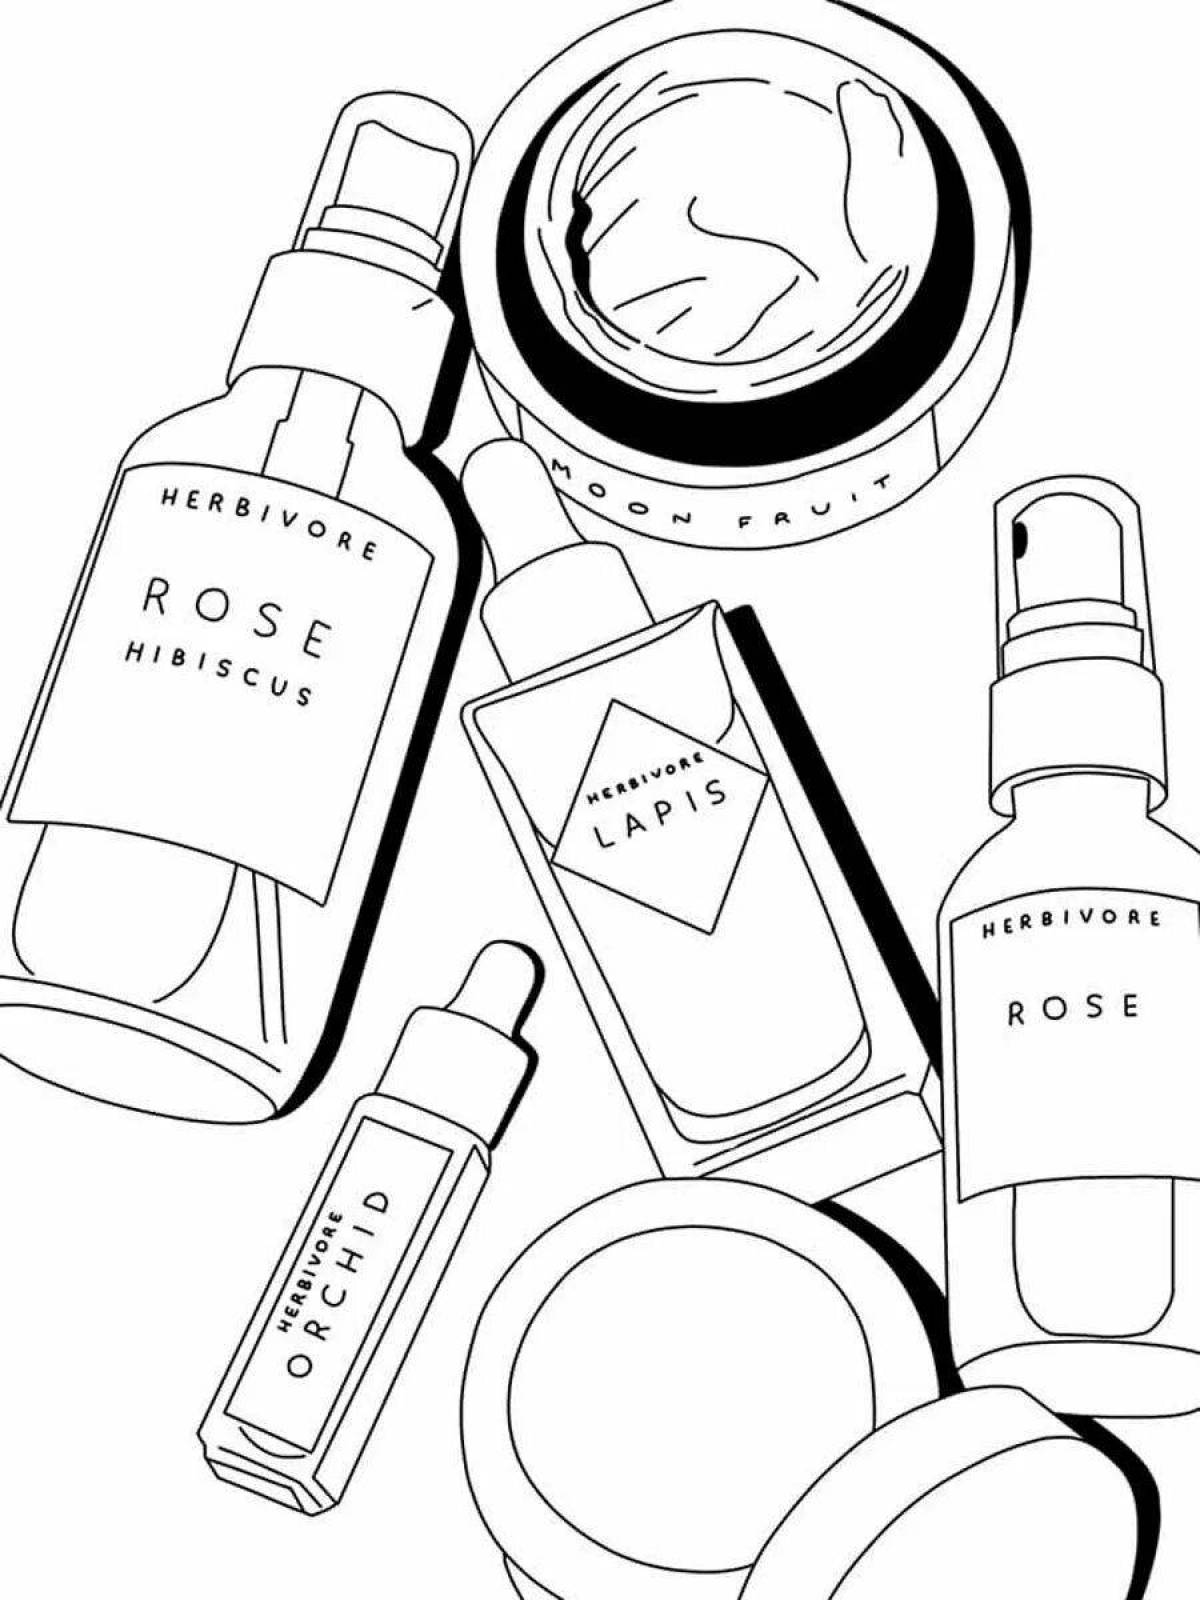 Coloring page excellent skin care cosmetics